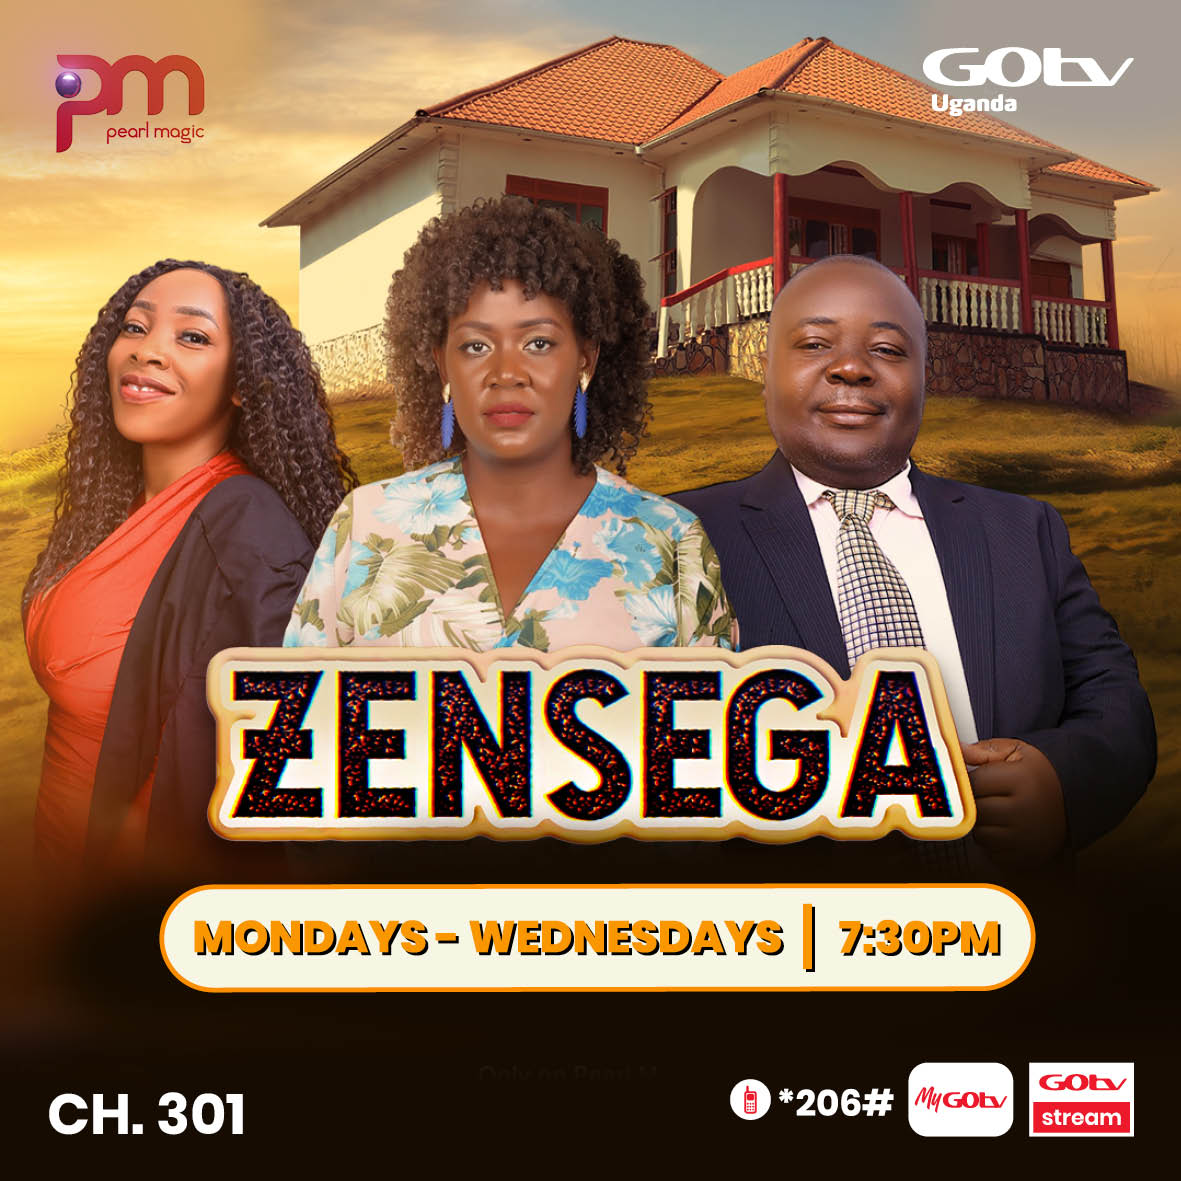 Don't miss a single episode of Zensega Every Monday-Wednesday at 7:30pm on Pearl Magic CH 301 Download MyGOtvApp mygotv.onelink.me/JpWQ/epl1 to stay connected to GOtv #GOtvStream #PMPKuPlus